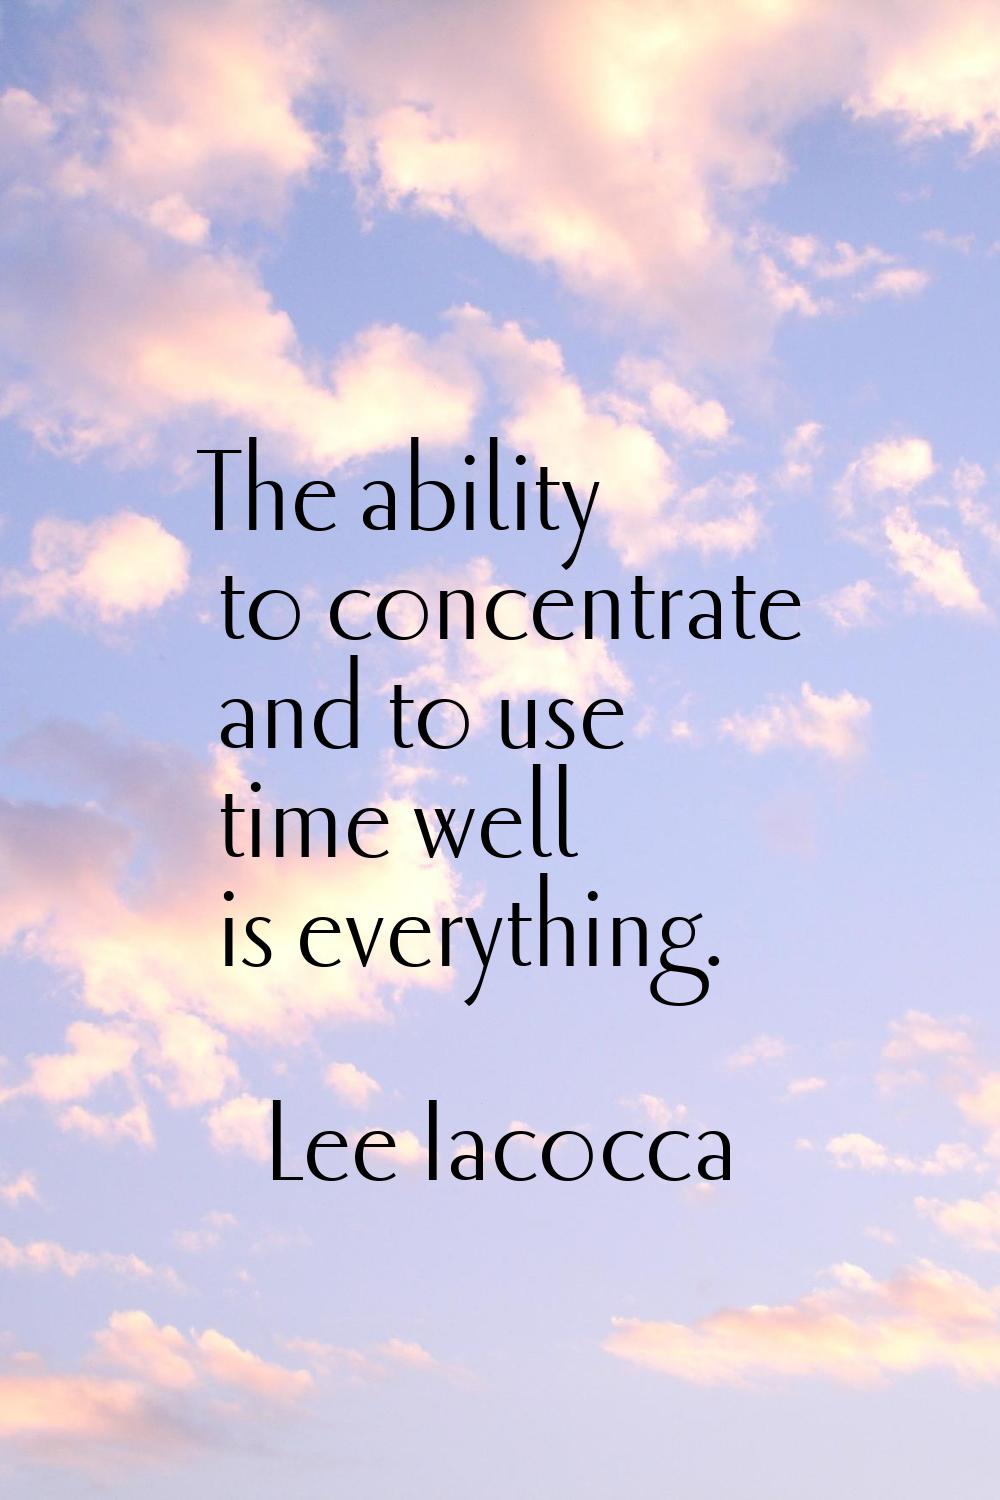 The ability to concentrate and to use time well is everything.